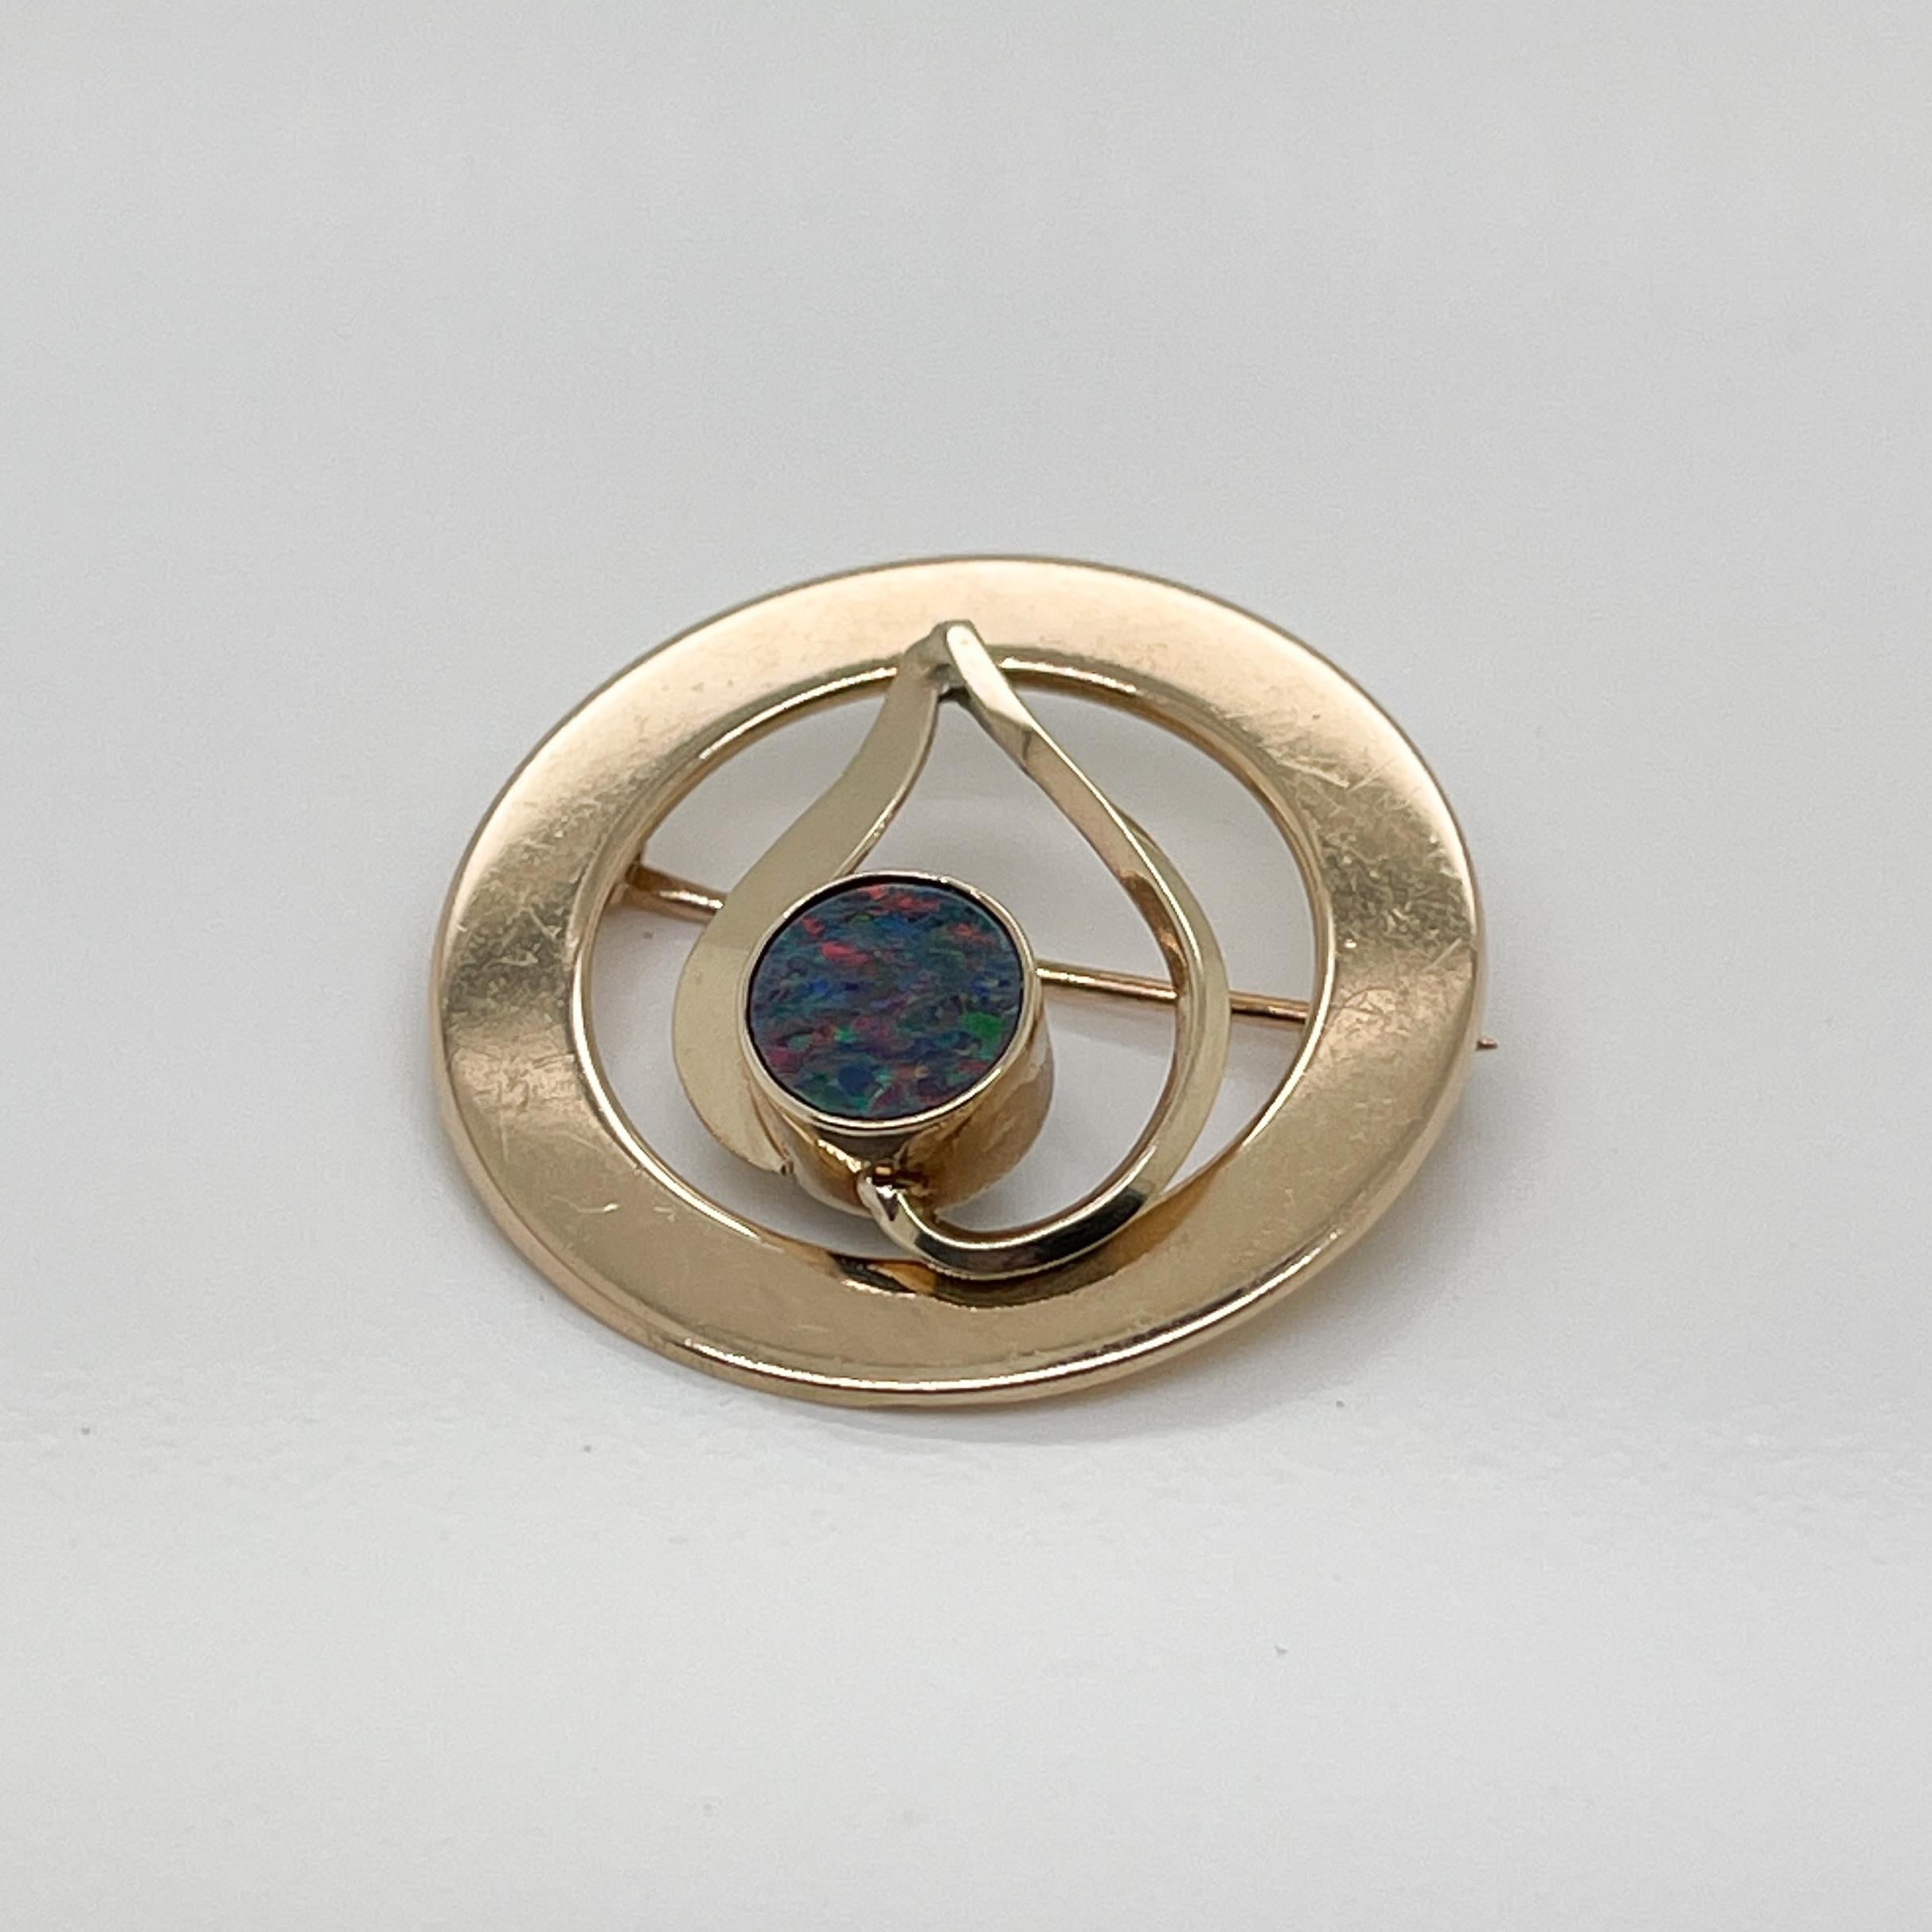 A very fine 14k gold and Australian opal doublet brooch or pin.

With a round doublet opal bezel set in 14k gold inside inverted heart shape that is framed in a flat golden circle.  

Simply a terrific brooch!

Date:
20th Century

Overall